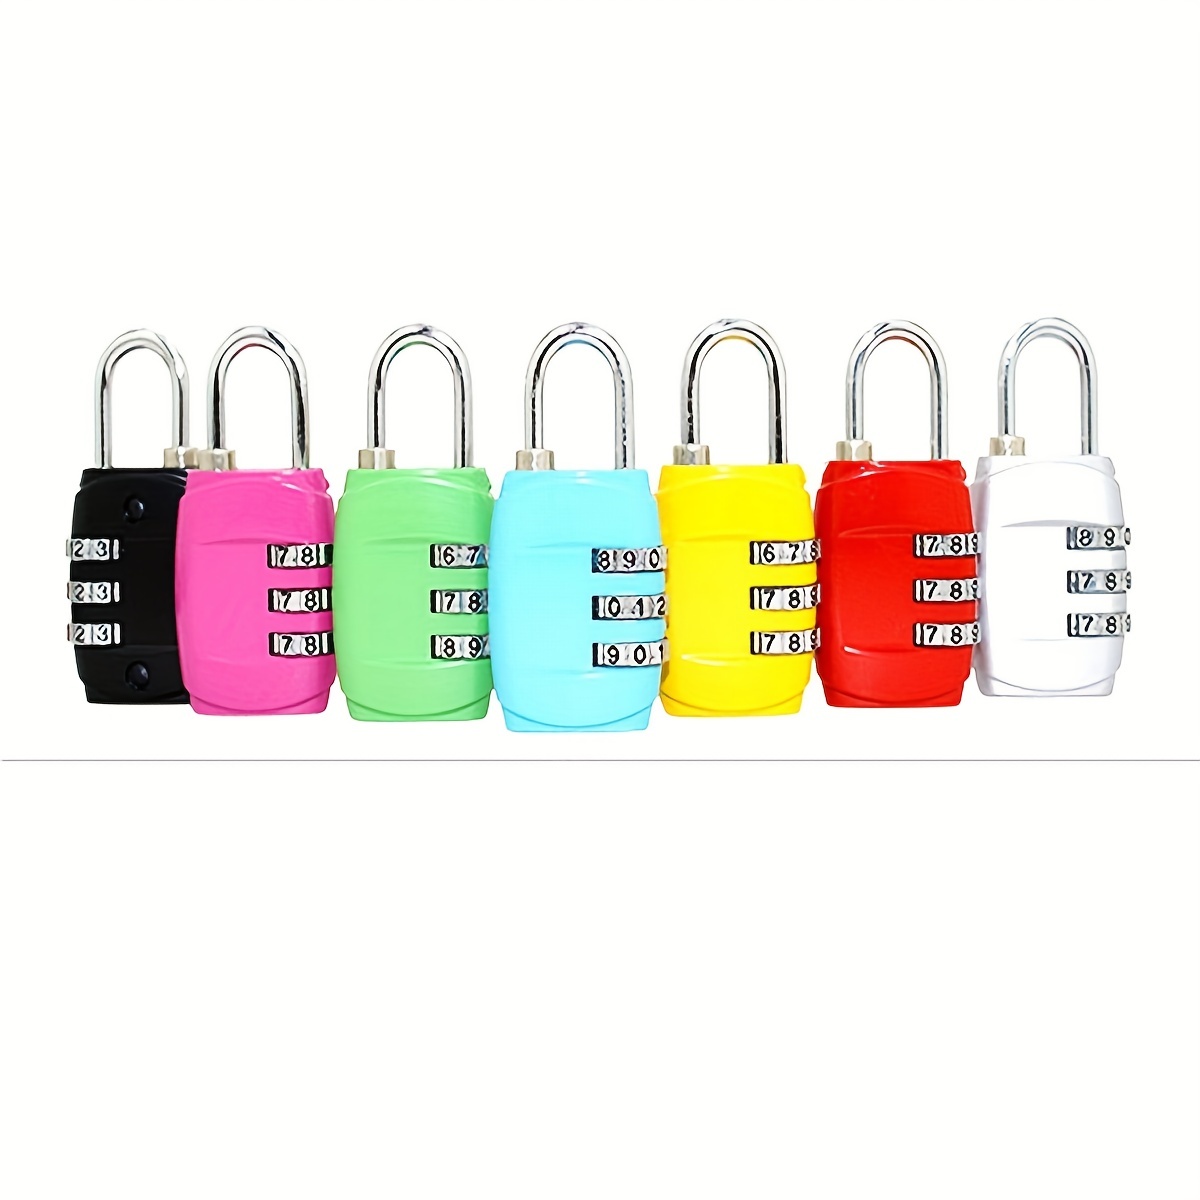 3 Dial Digit Mini Backpack Zipper Lock Dormitory Cabinet Password Padlock  Luggage Trolley Case Lock Student Travel Security Tool - AliExpress